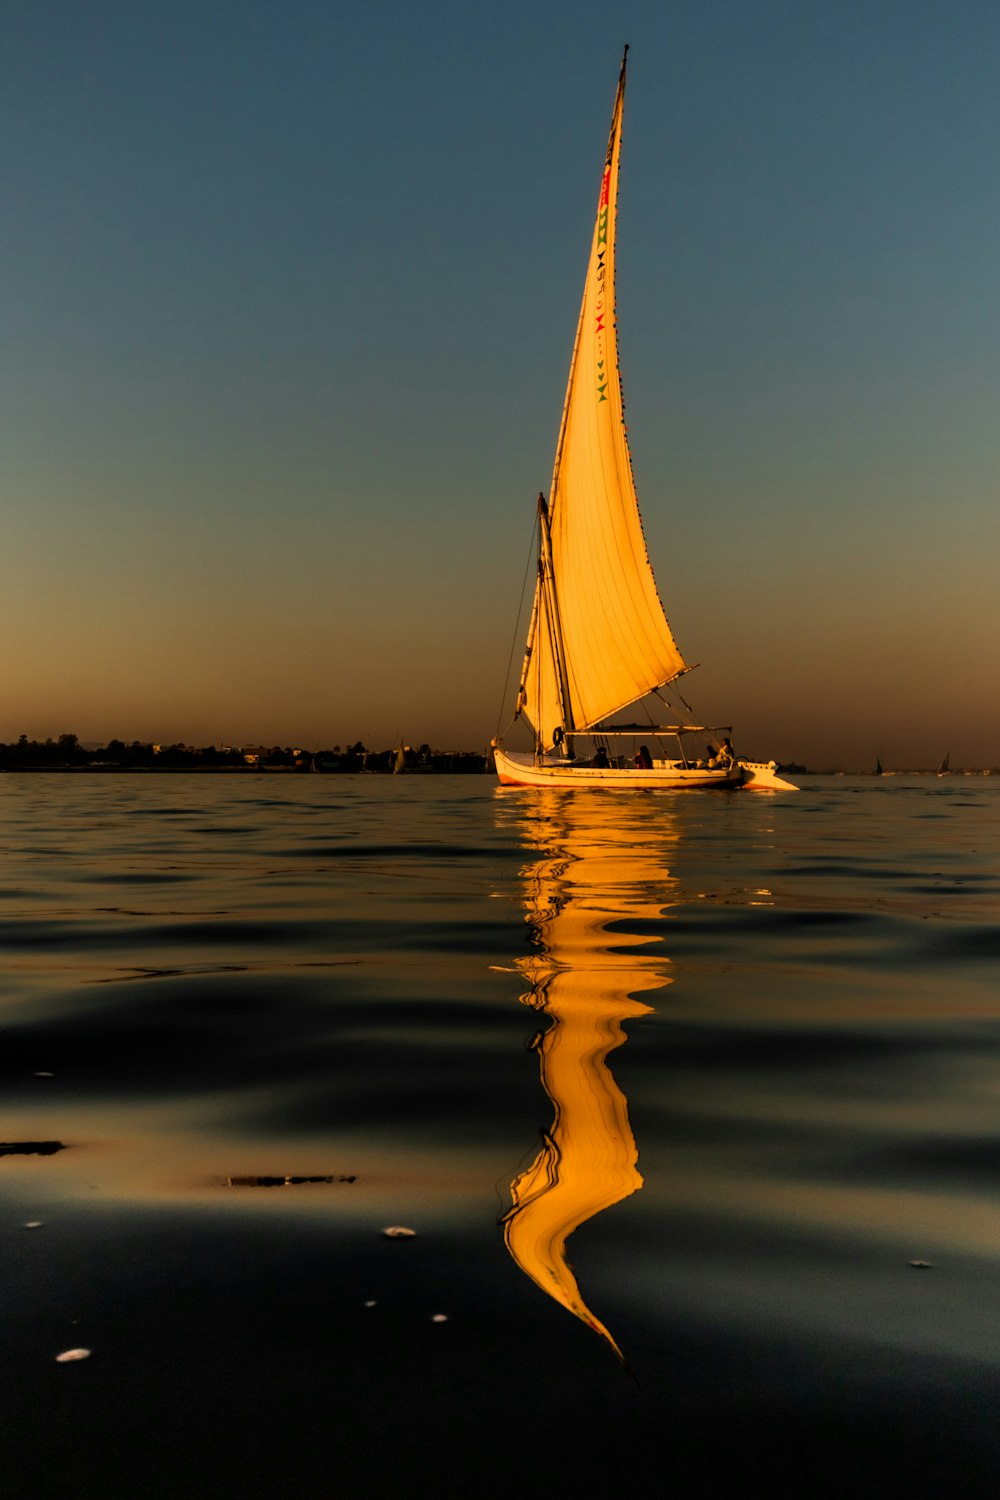 a sailboat sailing on a body of water